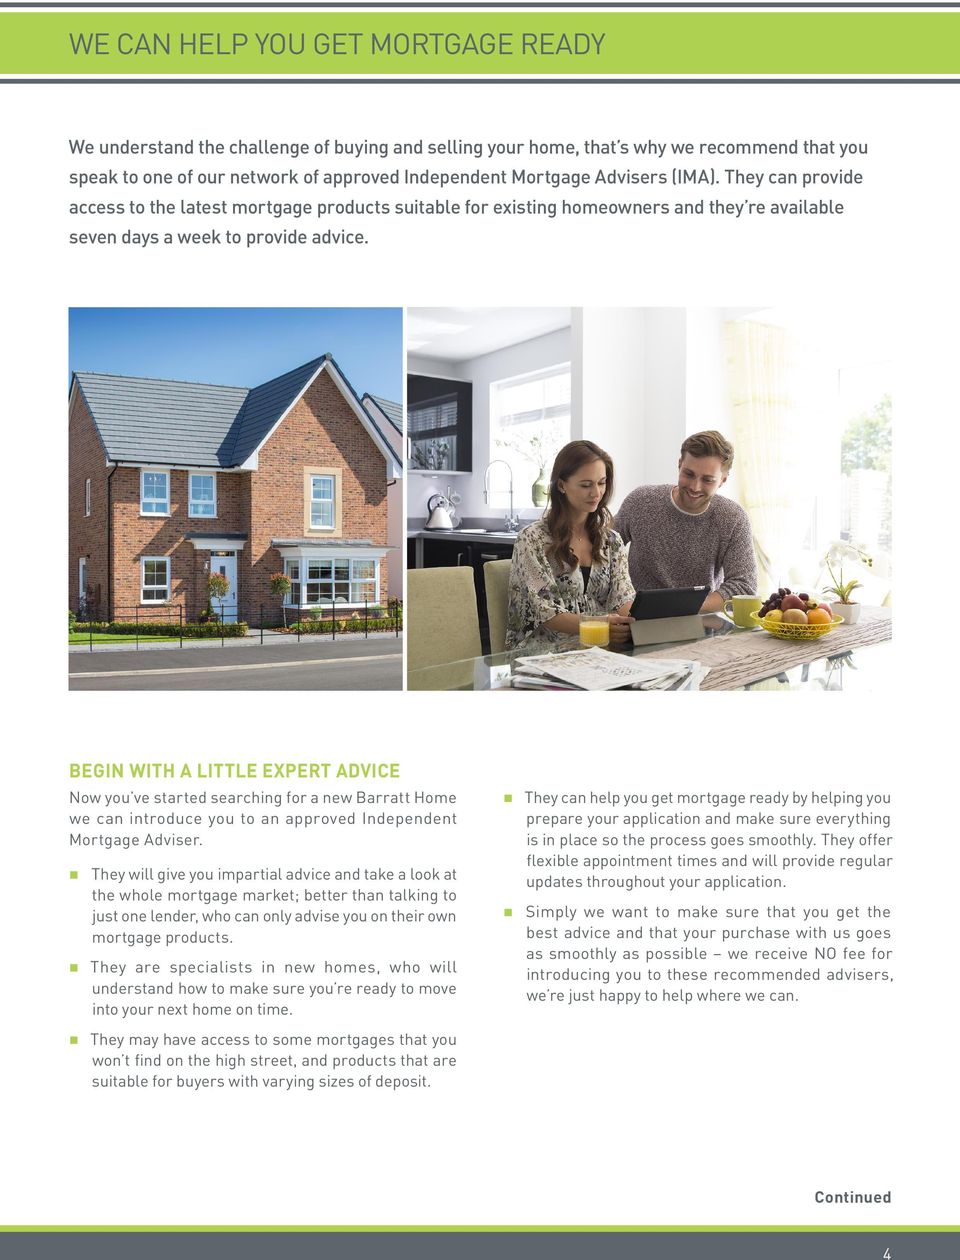 BEGIN WITH A LITTLE EXPERT ADVICE Now you ve started searching for a new Barratt Home we can introduce you to an approved Independent Mortgage Adviser.